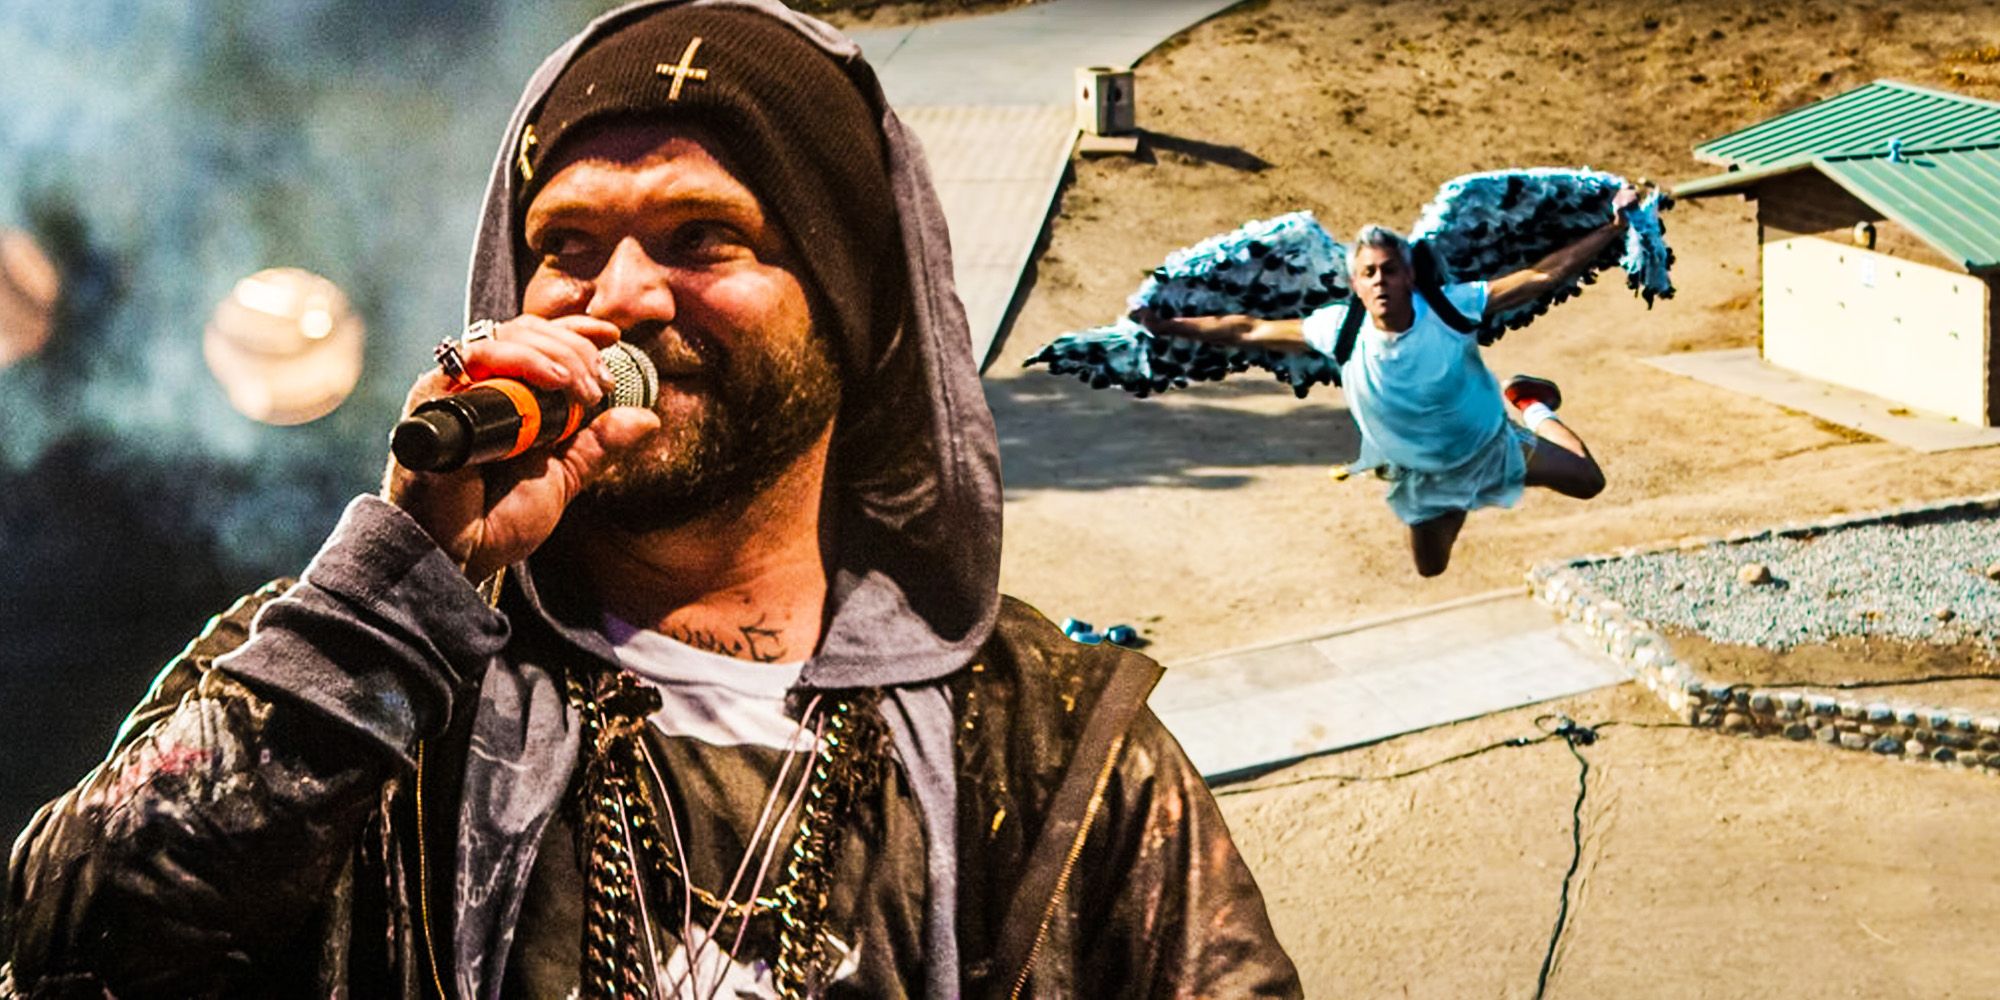 How much is Bam Margera in Jackass Forever?